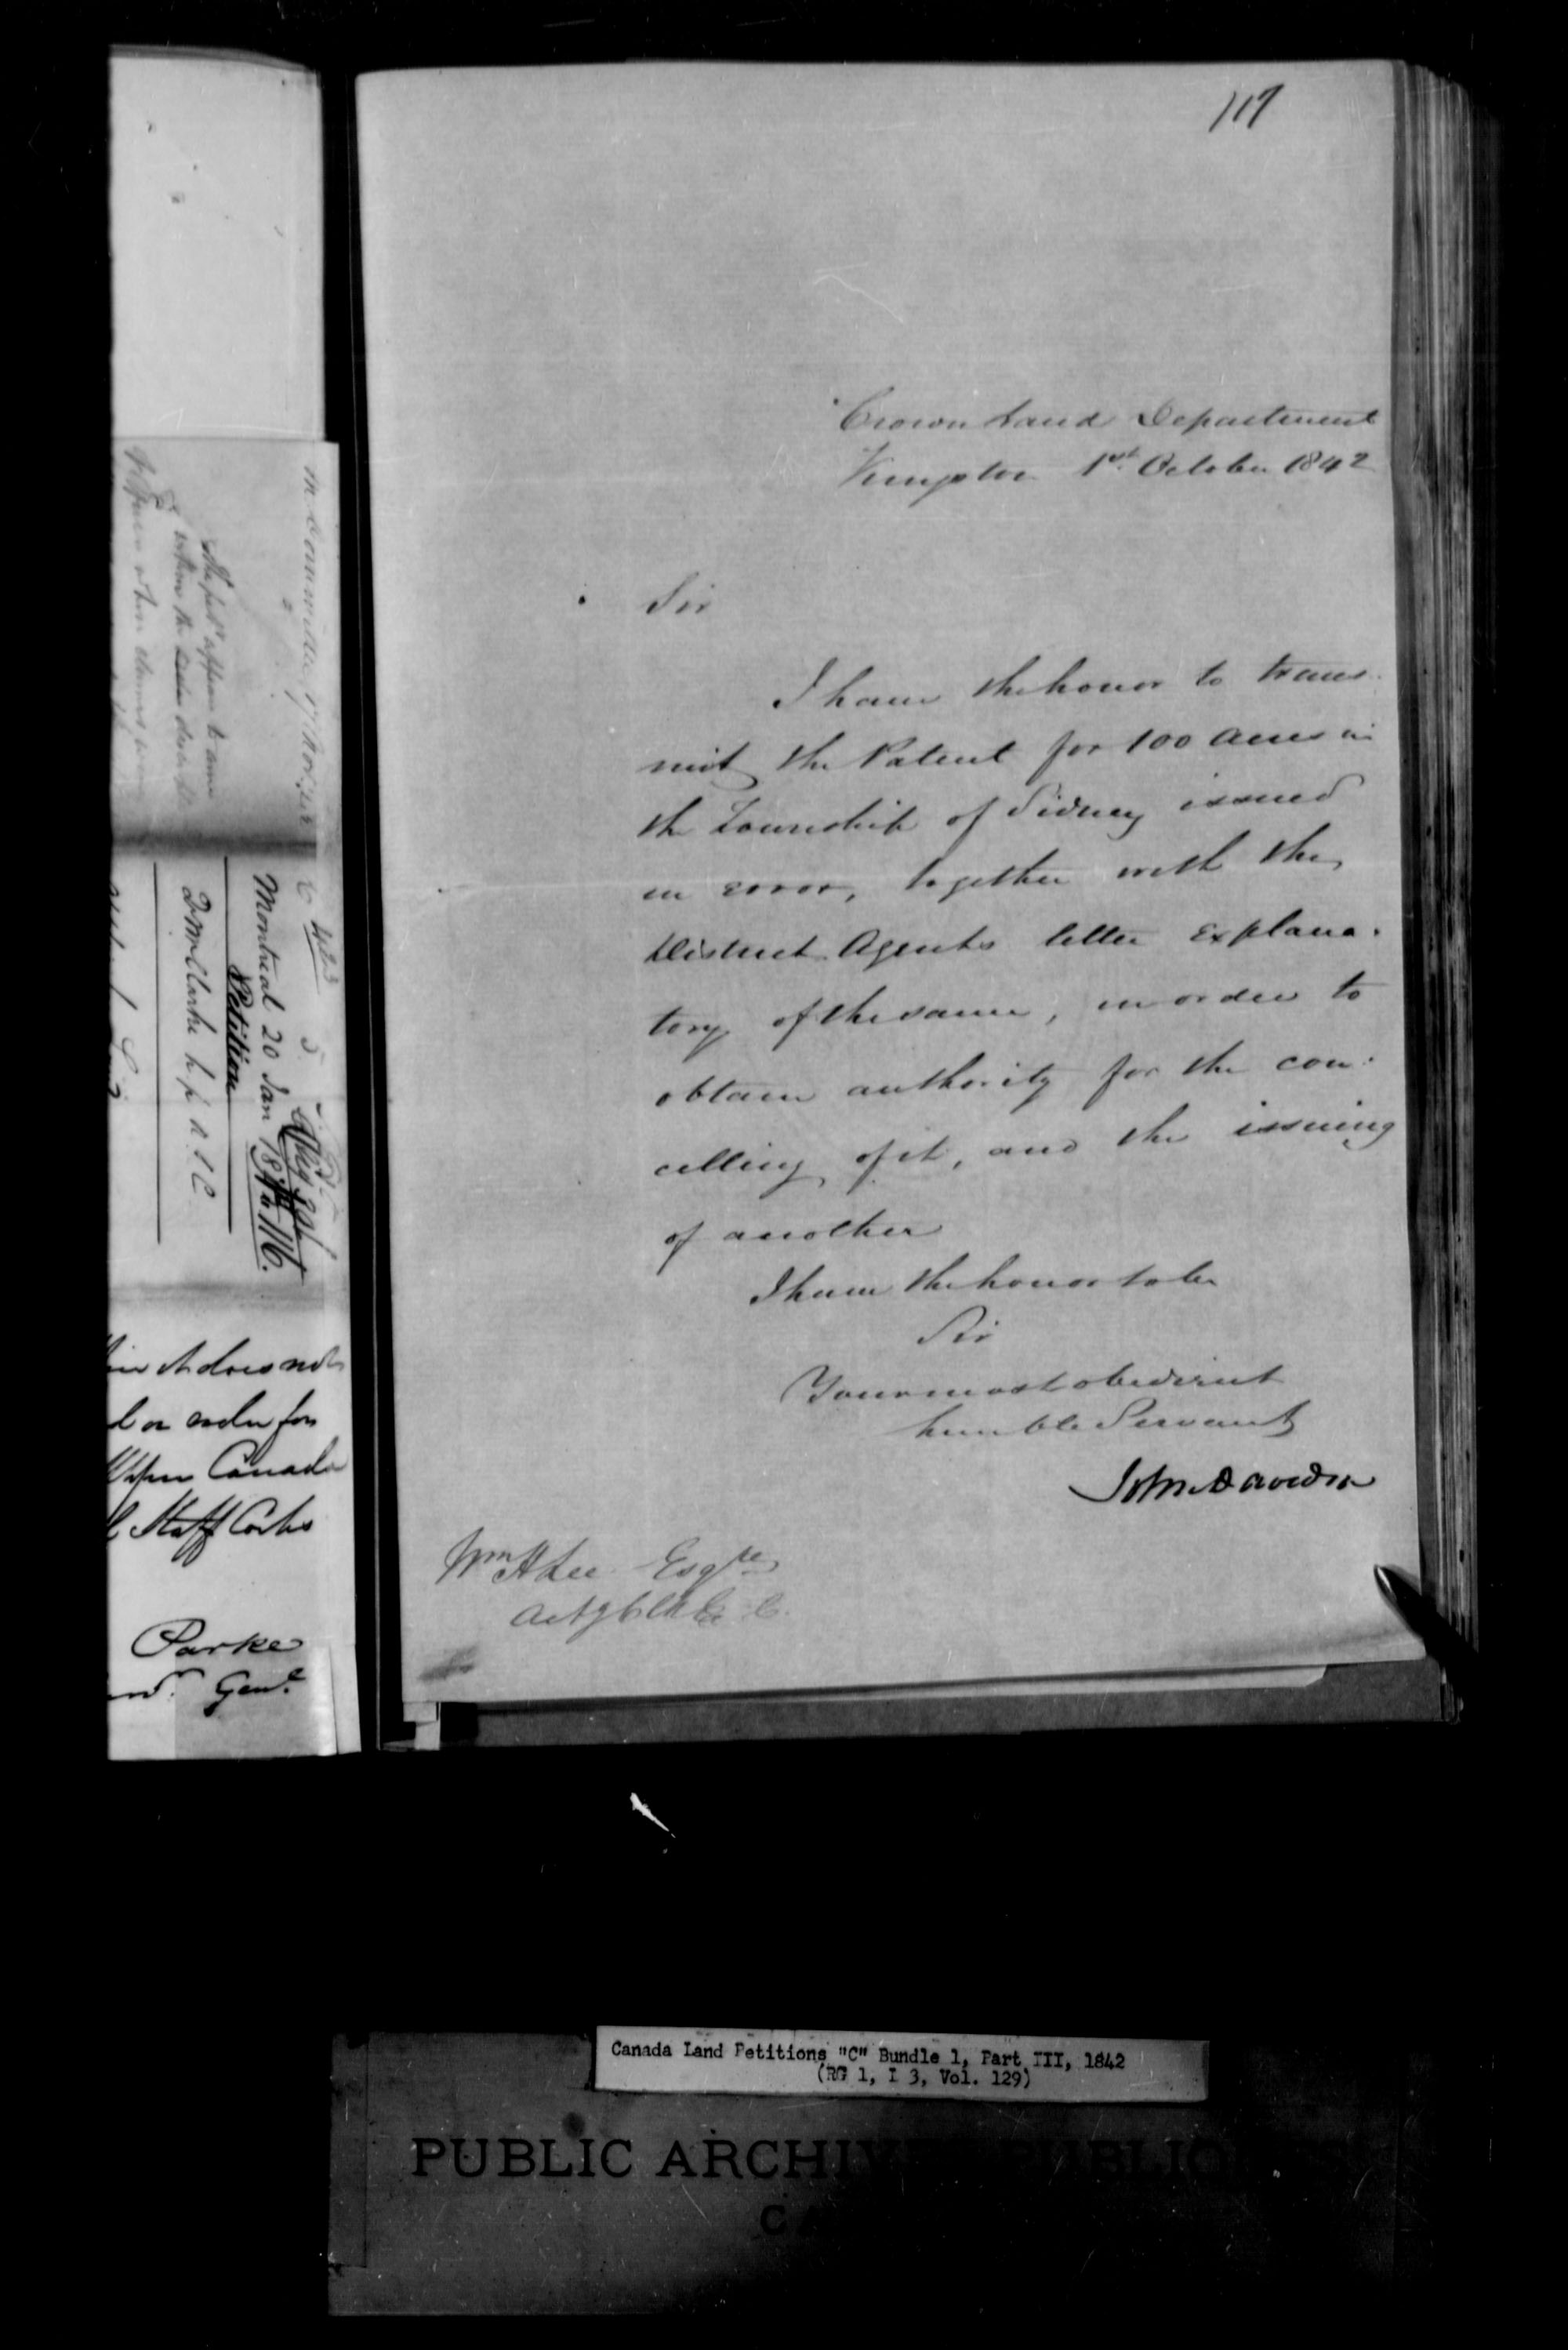 Title: Upper Canada Land Petitions (1763-1865) - Mikan Number: 205131 - Microform: c-1733